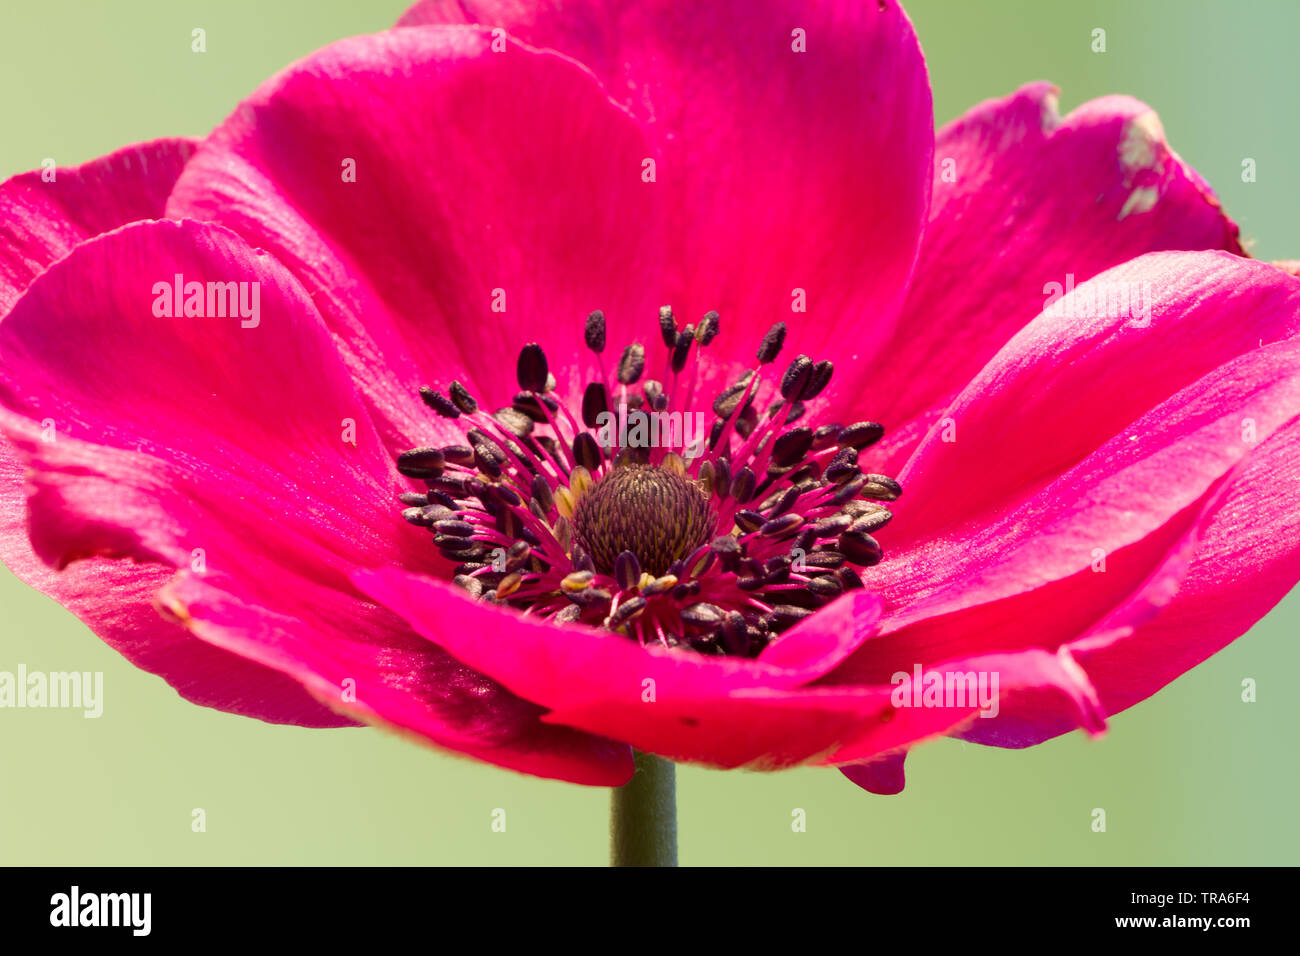 Close-up of an anemone blossom Stock Photo